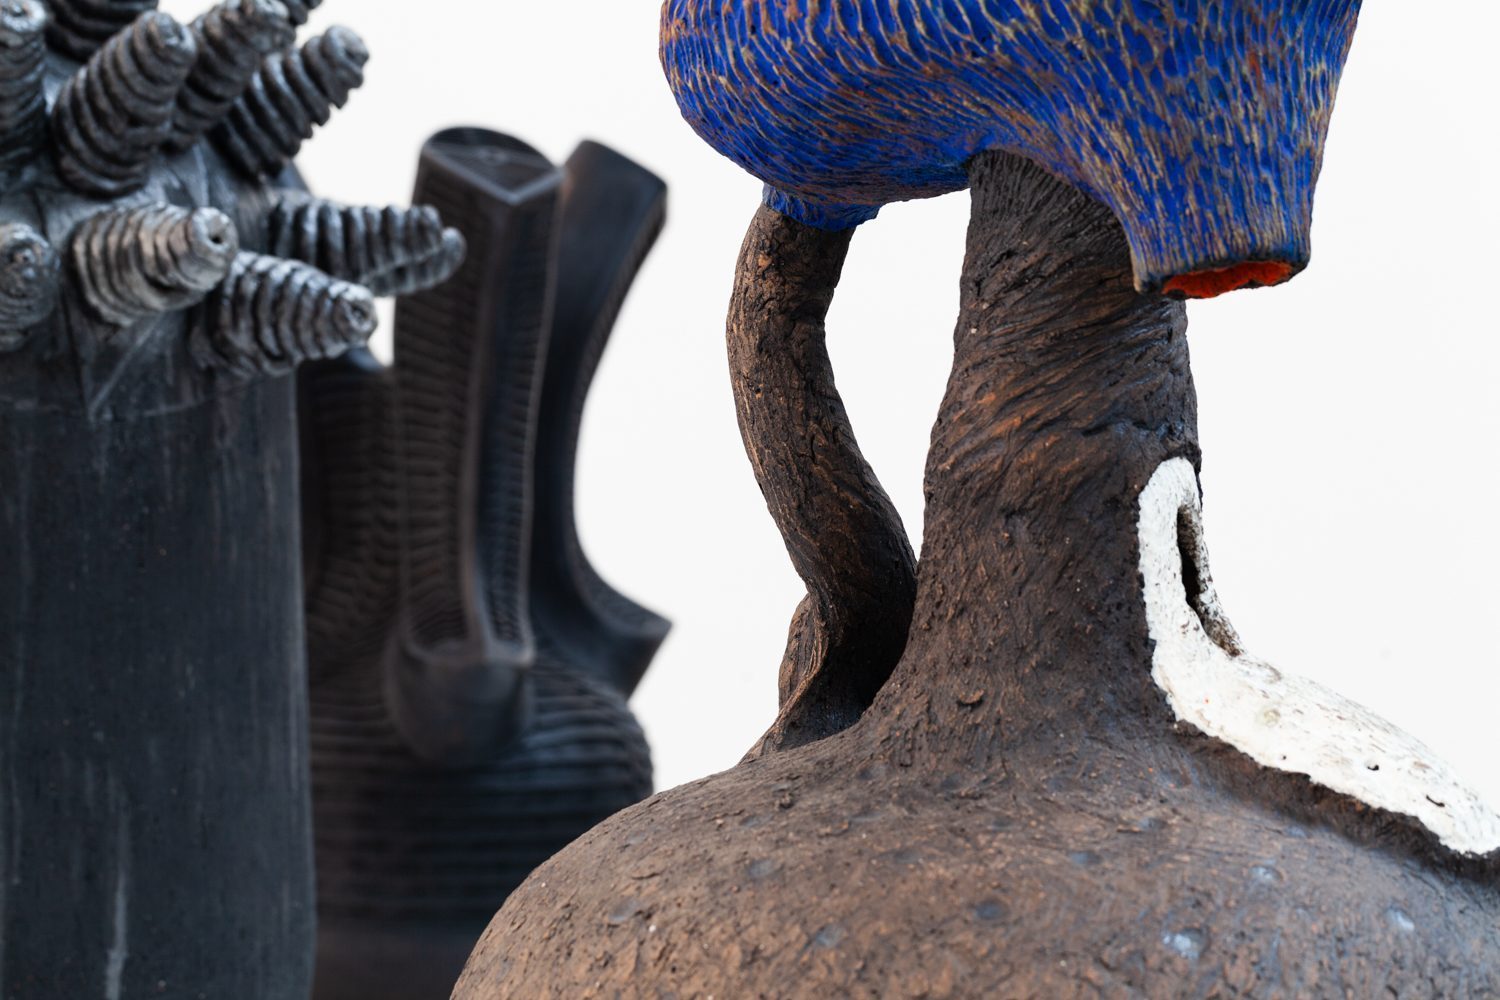 Detailed photos of three ceramic objects by artists from Africa